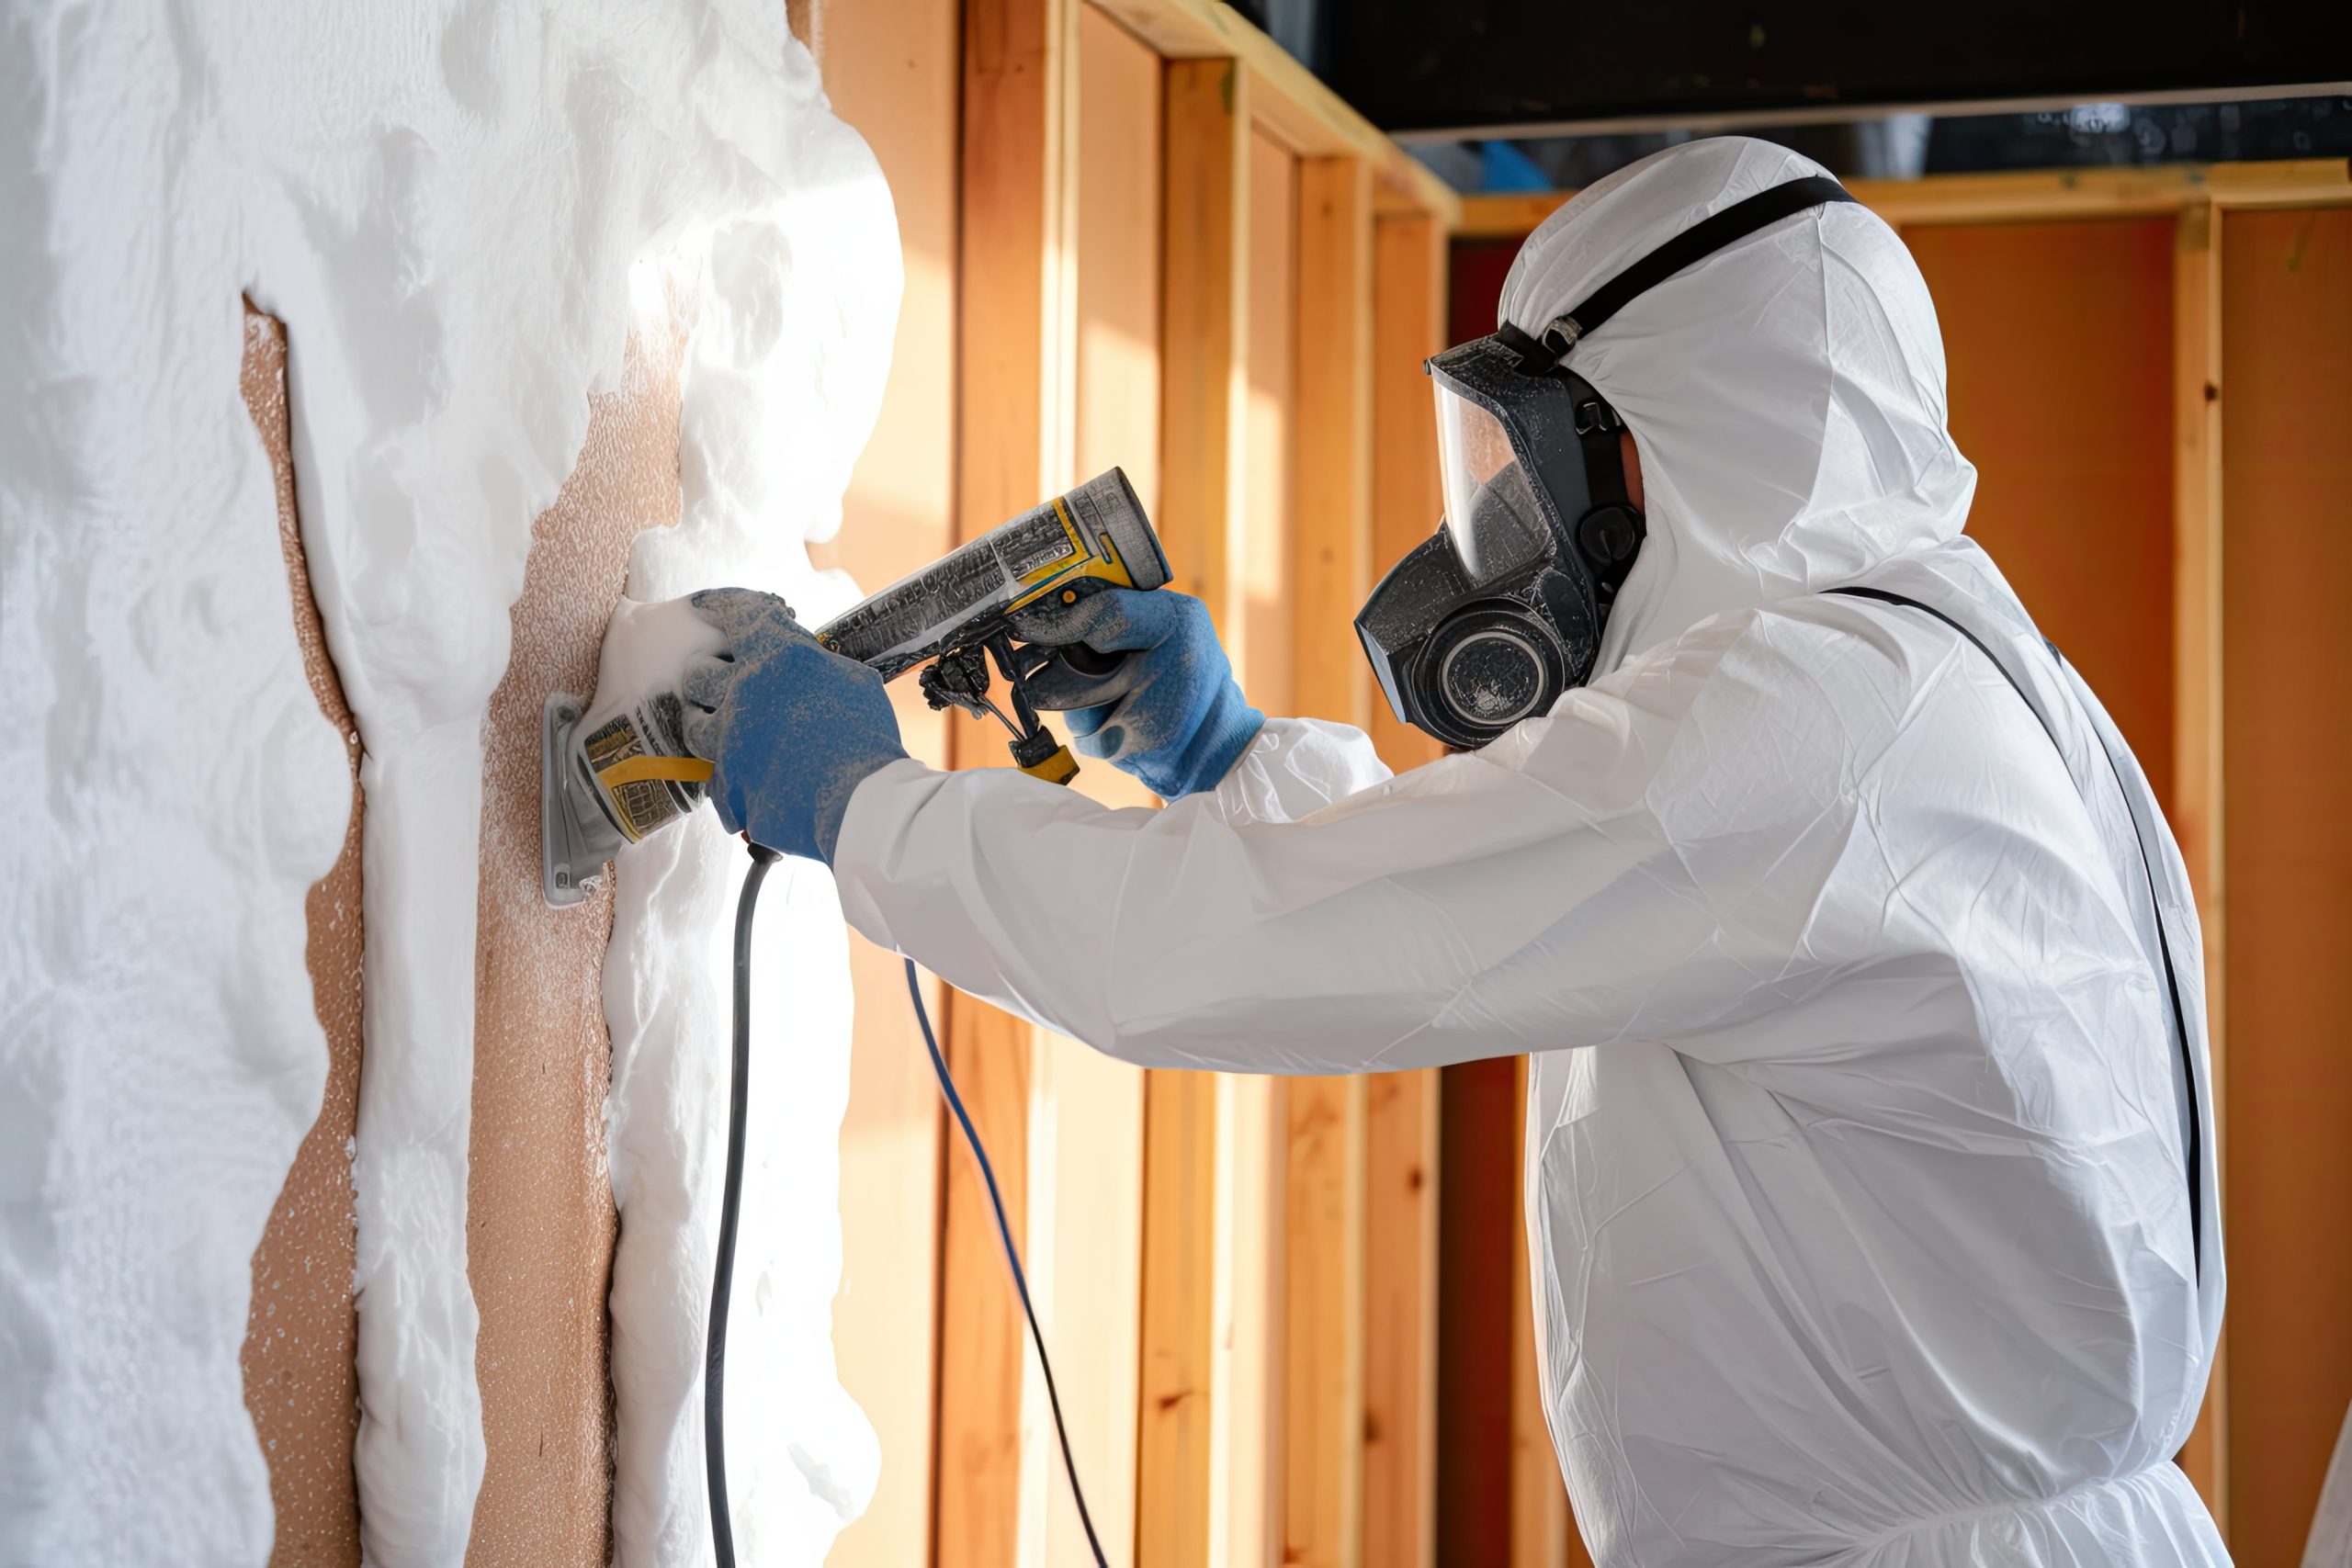 This is a picture for a blog post that talks about affordable home insulation with Star Companies.